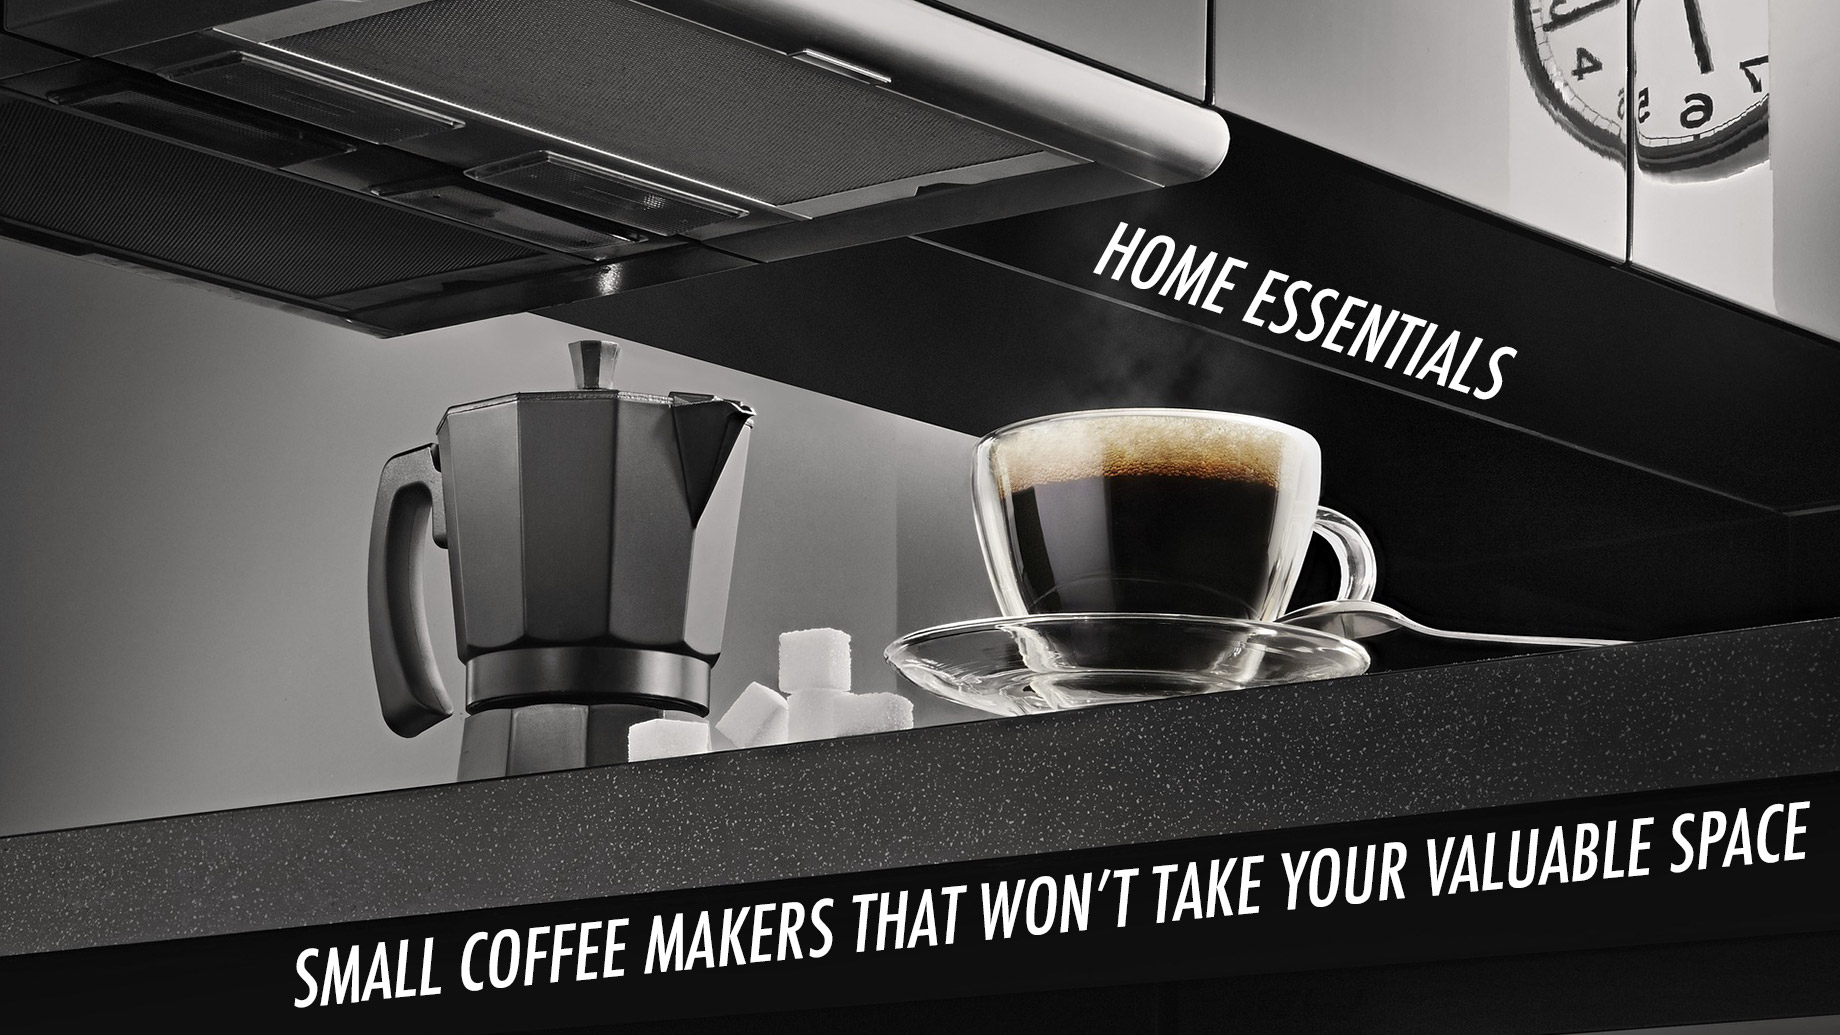 https://www.thepinnaclelist.com/wp-content/uploads/2020/04/00a-Space-Saver-Coffee-Makers-That-Won%E2%80%99t-Take-Your-Valuable-Space.jpg